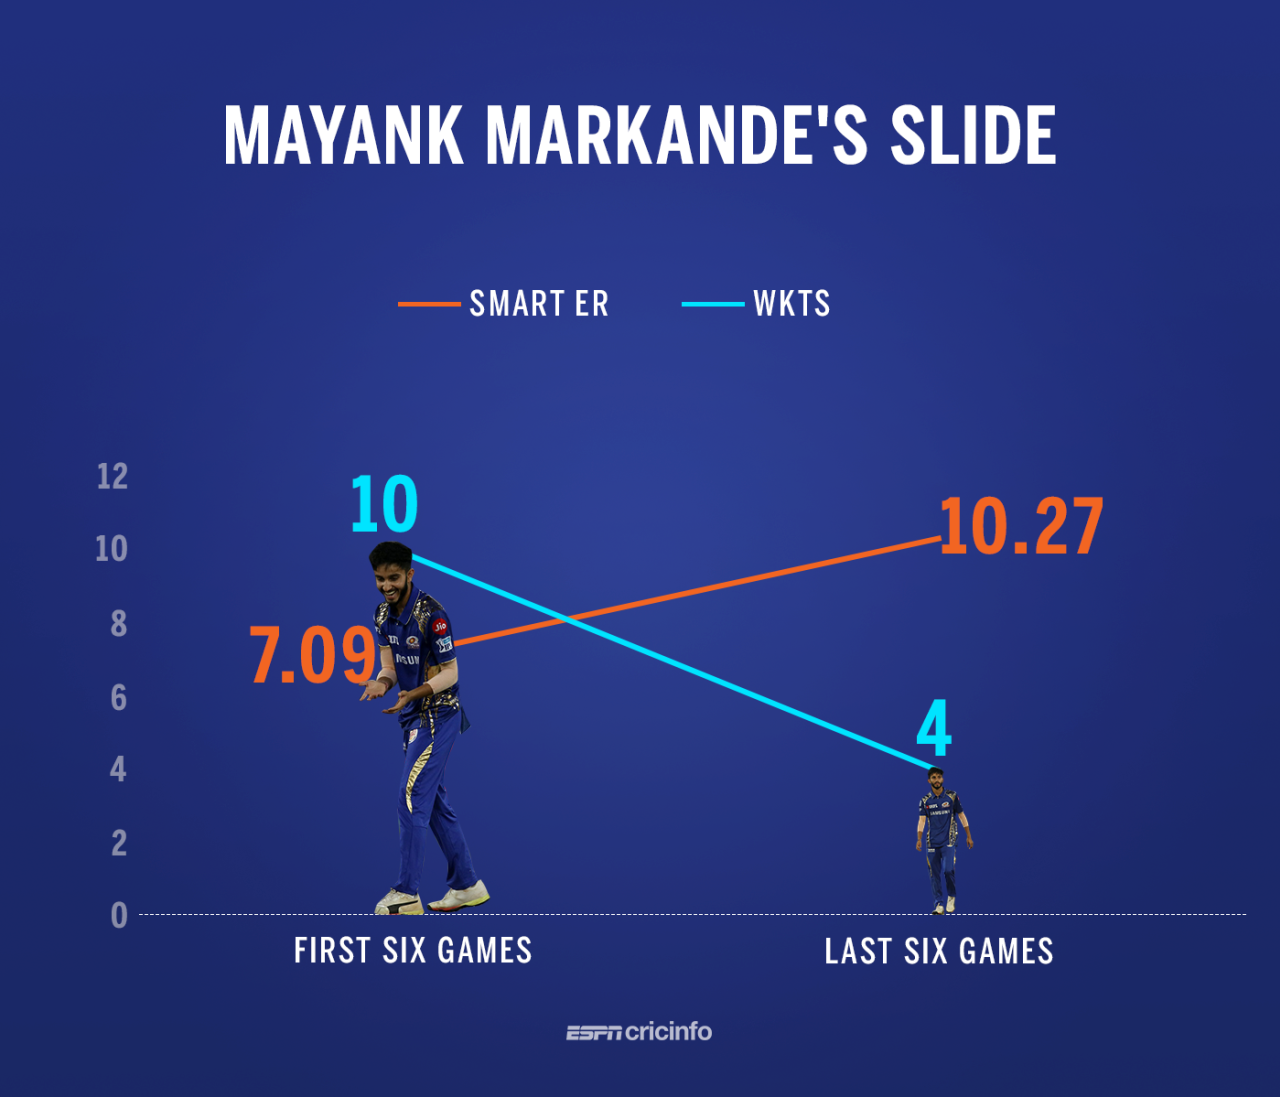 Mayank Markande's smart economy rate in his last six games is 10.27, May 12, 2018